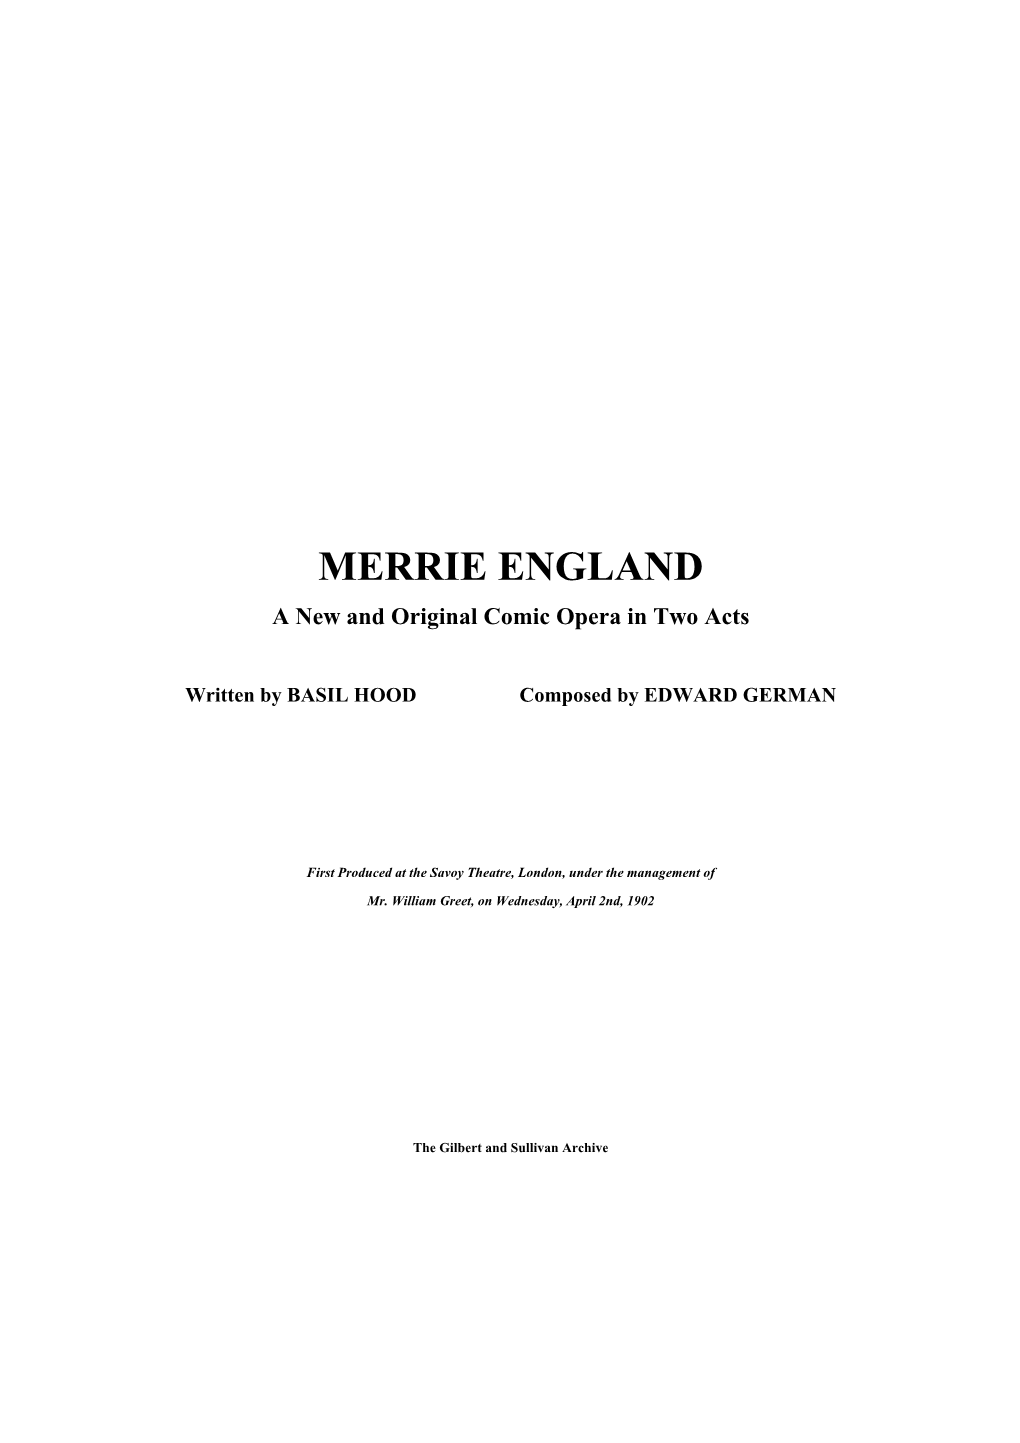 MERRIE ENGLAND a New and Original Comic Opera in Two Acts